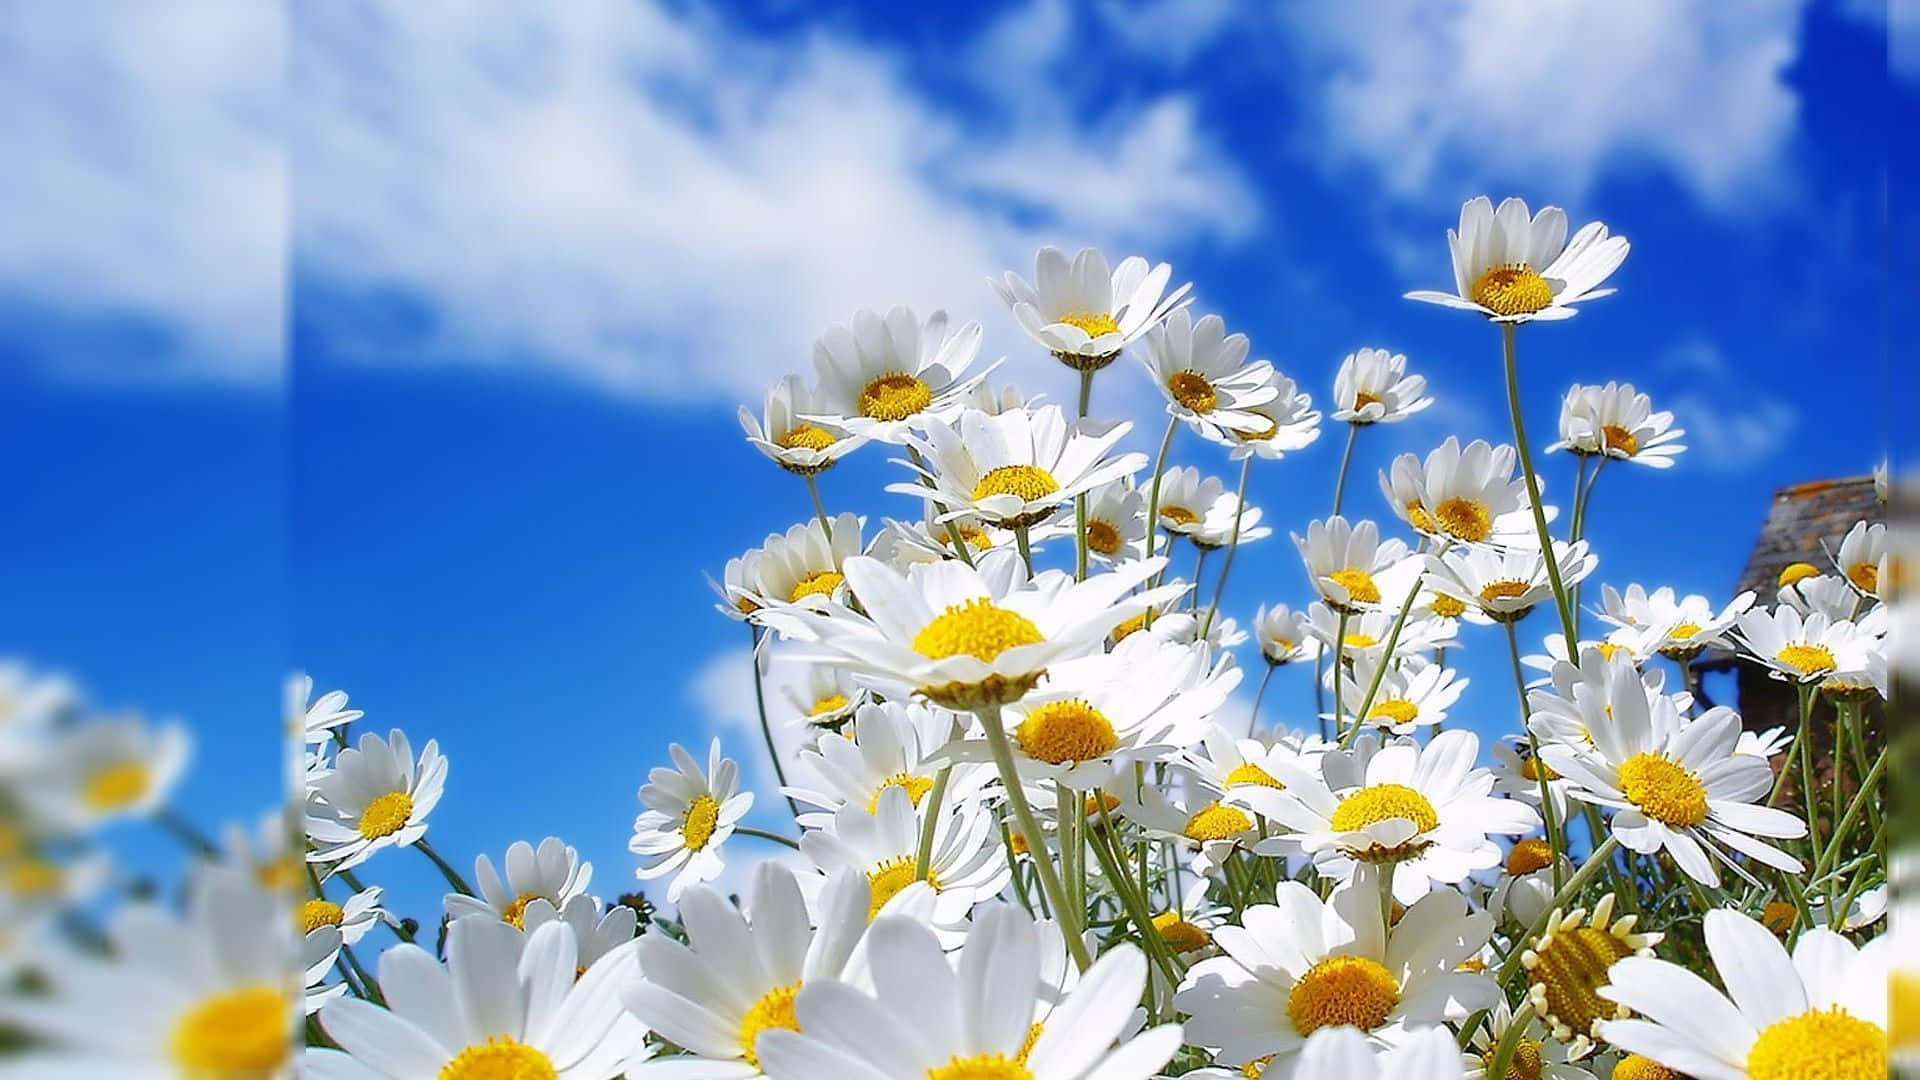 Daisies In The Field With Blue Sky Wallpaper